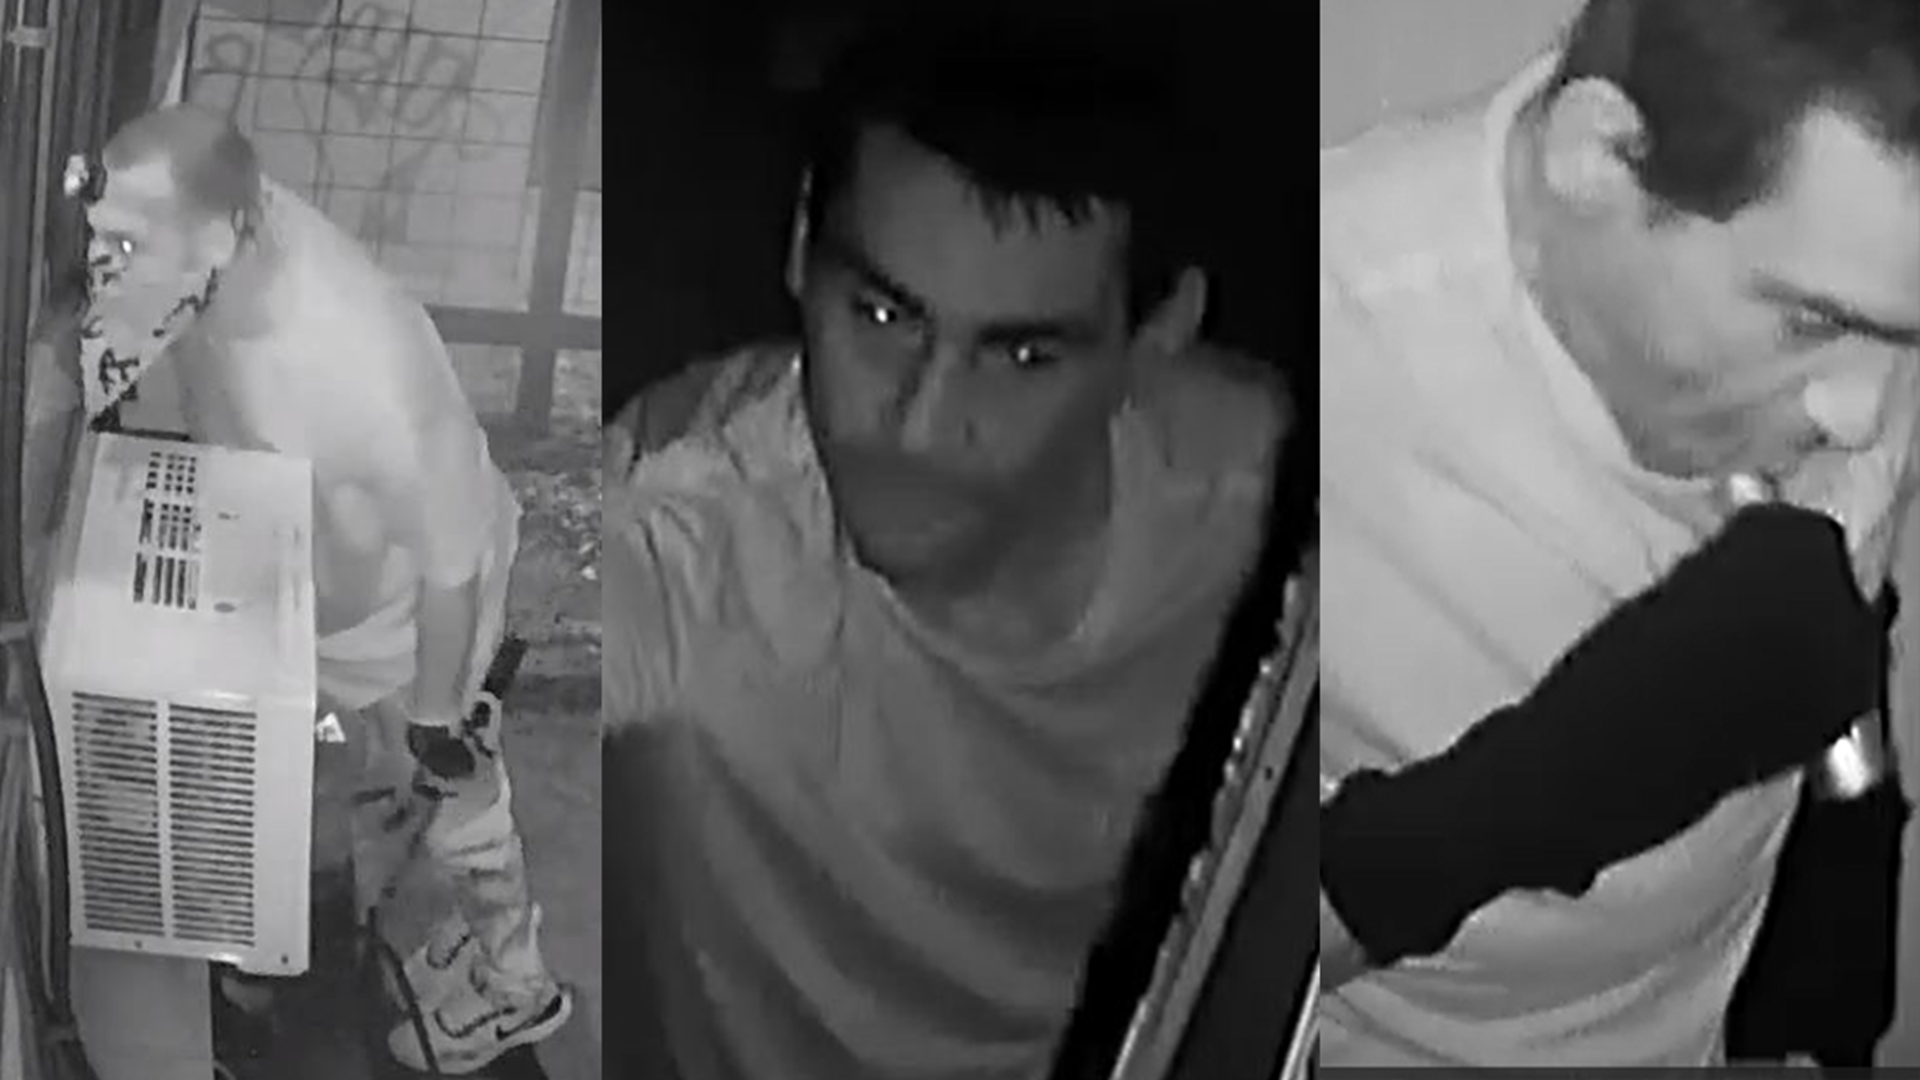 The Austin Police Department is seeking the public's help identifying burglars caught on camera stealing from several local businesses.